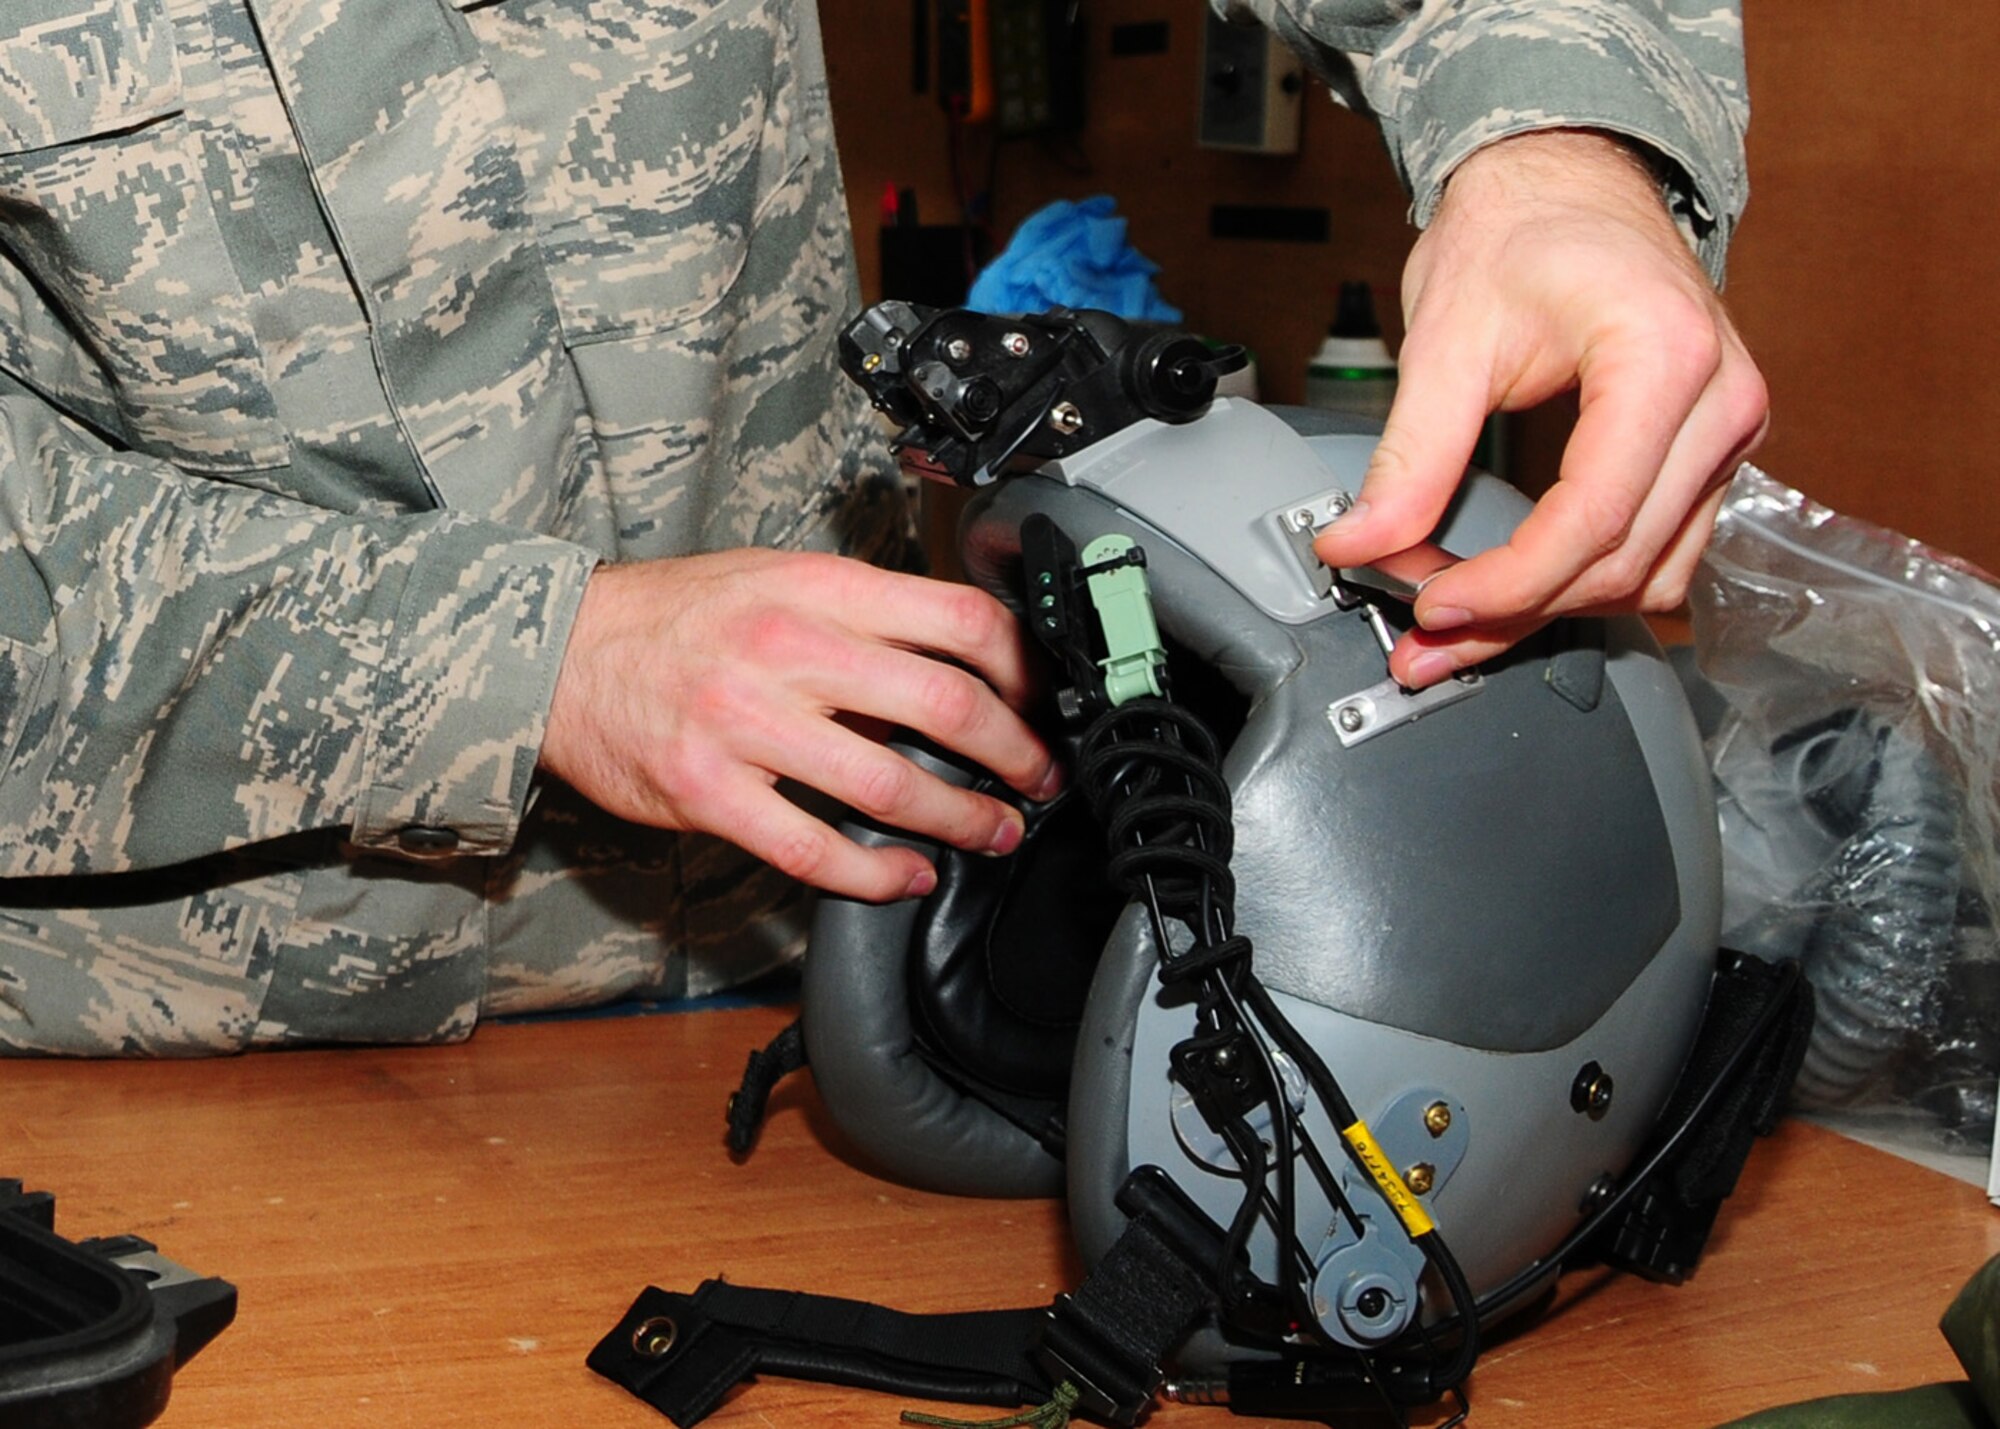 SOUTHWEST ASIA -- Tech. Sgt. Nathan Schasse, 817th Expeditionary Airlift Squadron, snaps the night vision goggle mounting clip onto a aircrew helmet at an air base in Southwest Asia, June 18. The NVG's must be centered properly on the helmet to create the best fit for the aircrew and  to allow the user to get the most range of adjustment. Sergeant Schasse is deployed from McChord Air Force Base, Wash., and is originally from Madison, Wis. (U.S. Air Force photo/Senior Airman Courtney Richardson)